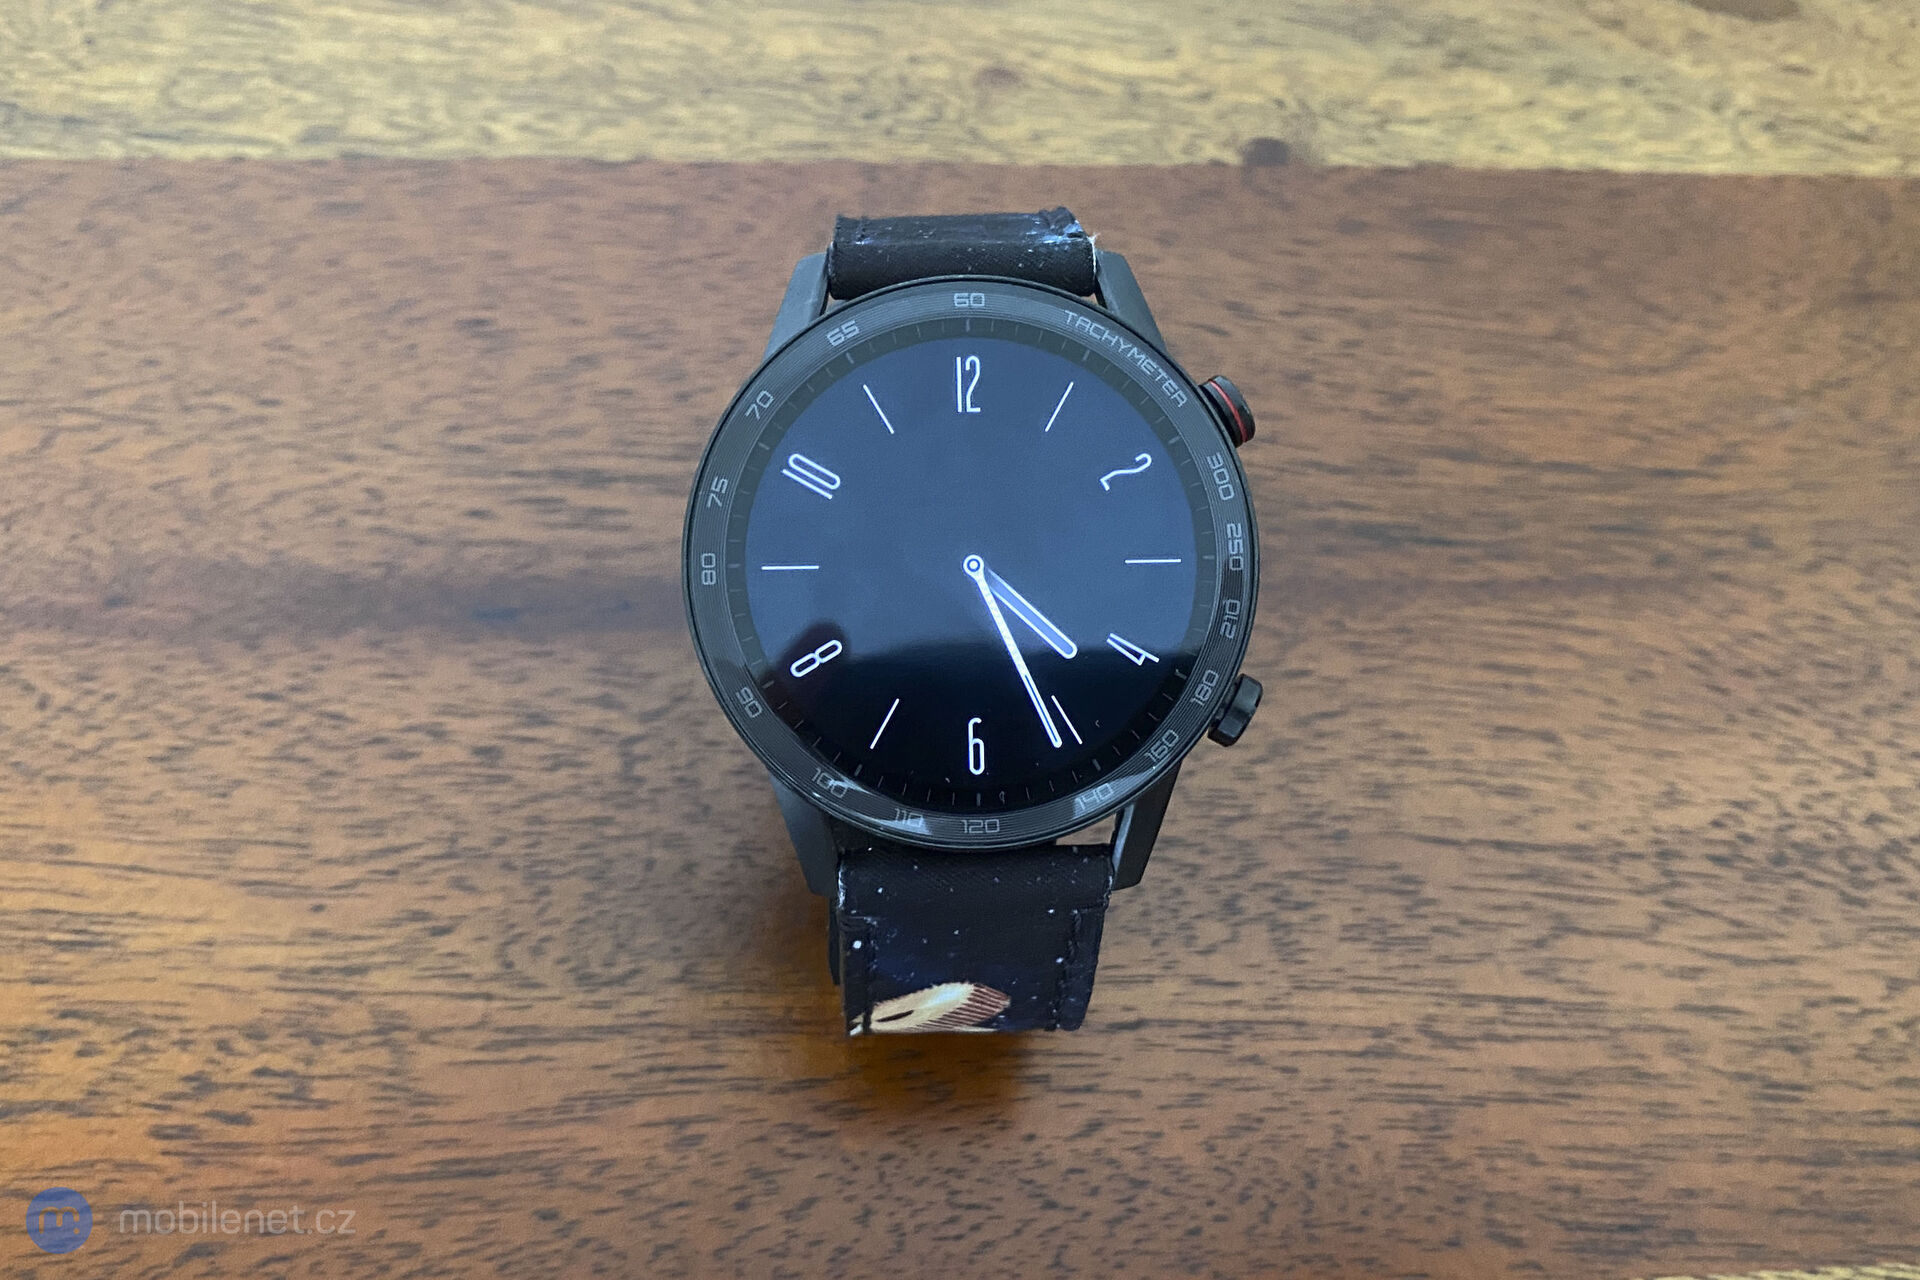 Honor MagicWatch 2